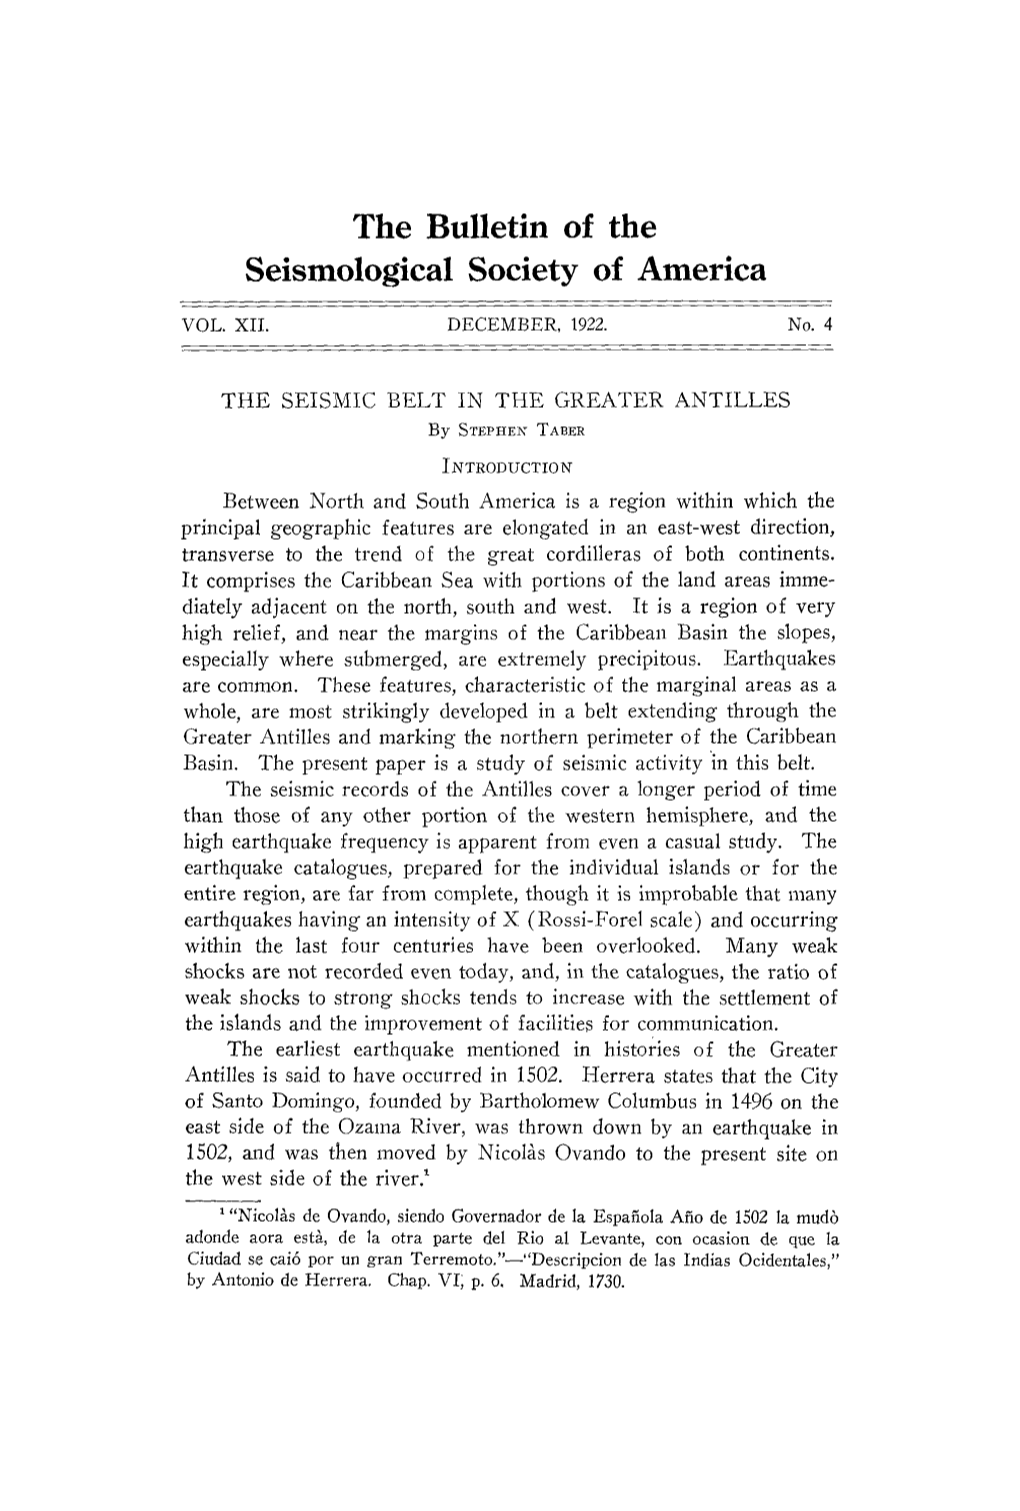 The Bulletin of the Seismological Society of America